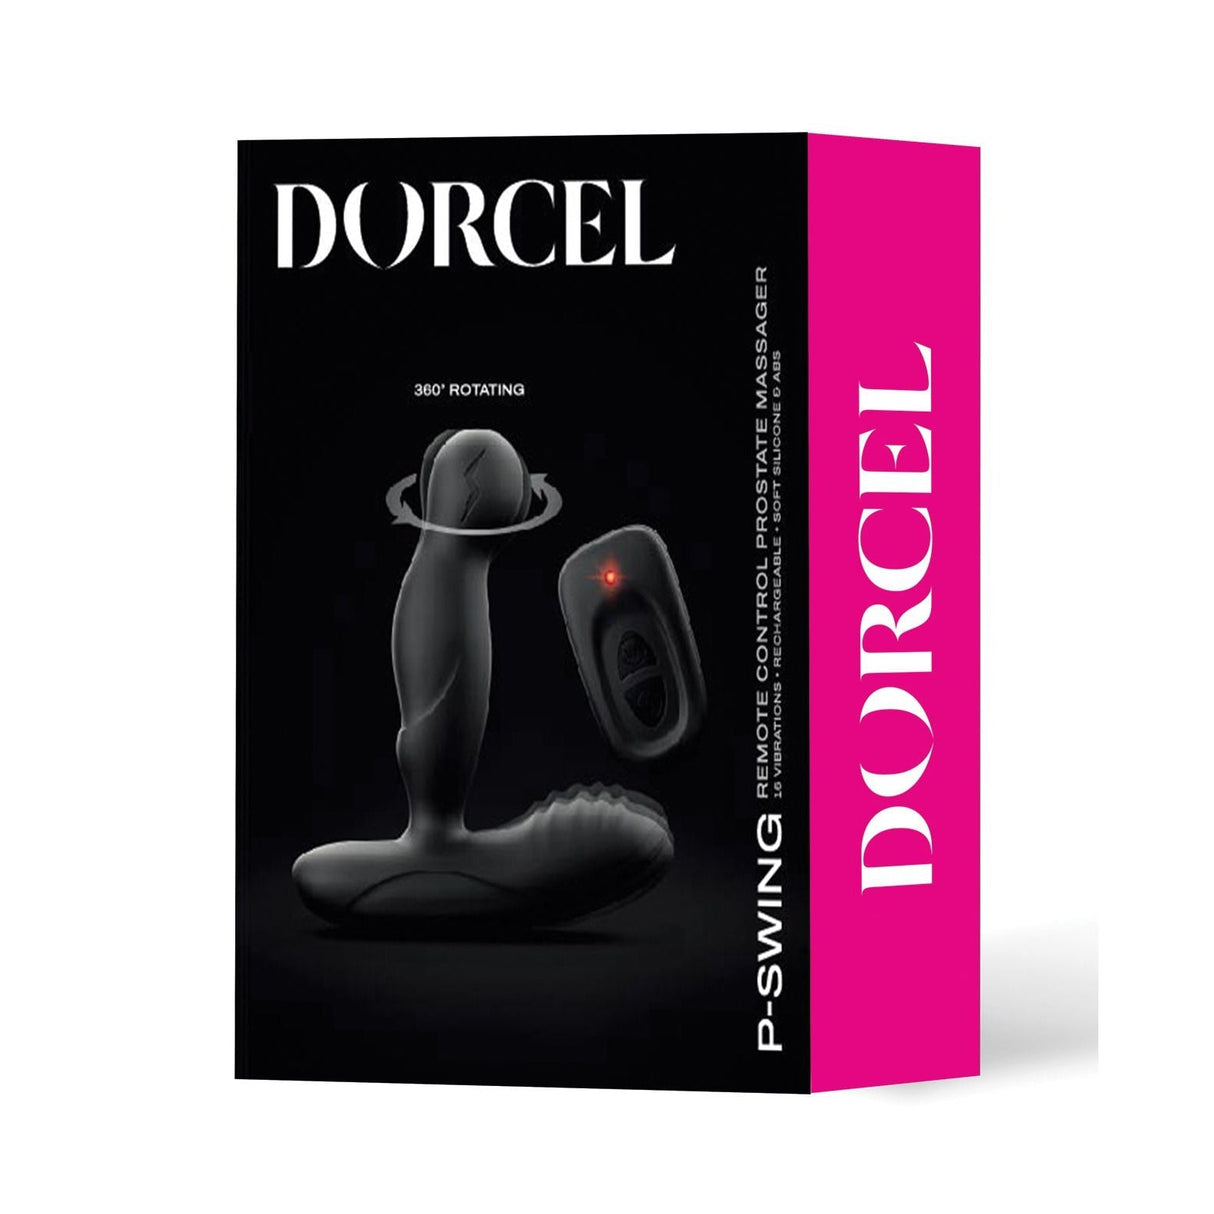 Dorcel P-Swing Soft Silicone Prostate Massager